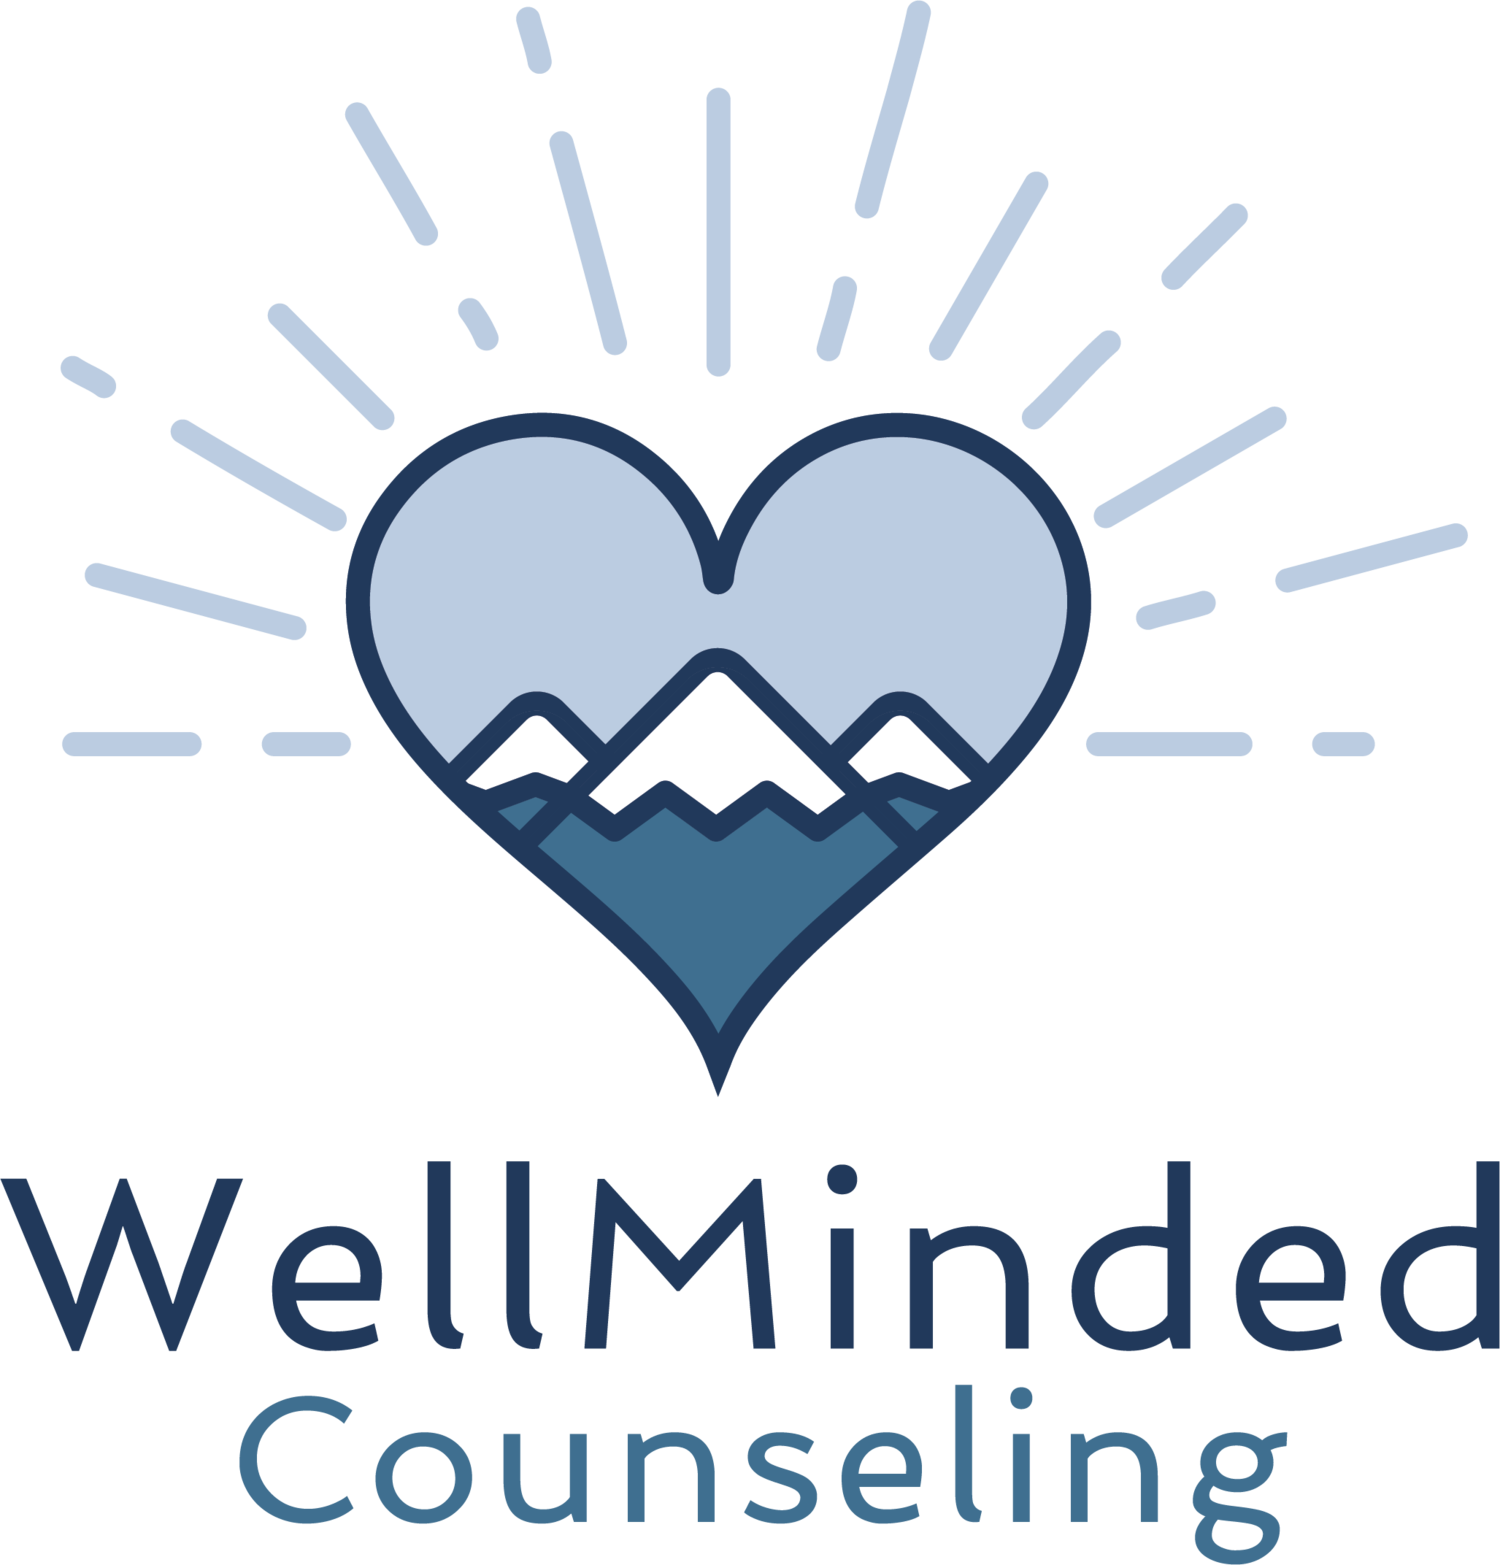 WellMinded Counseling – Colorado & Florida Counseling